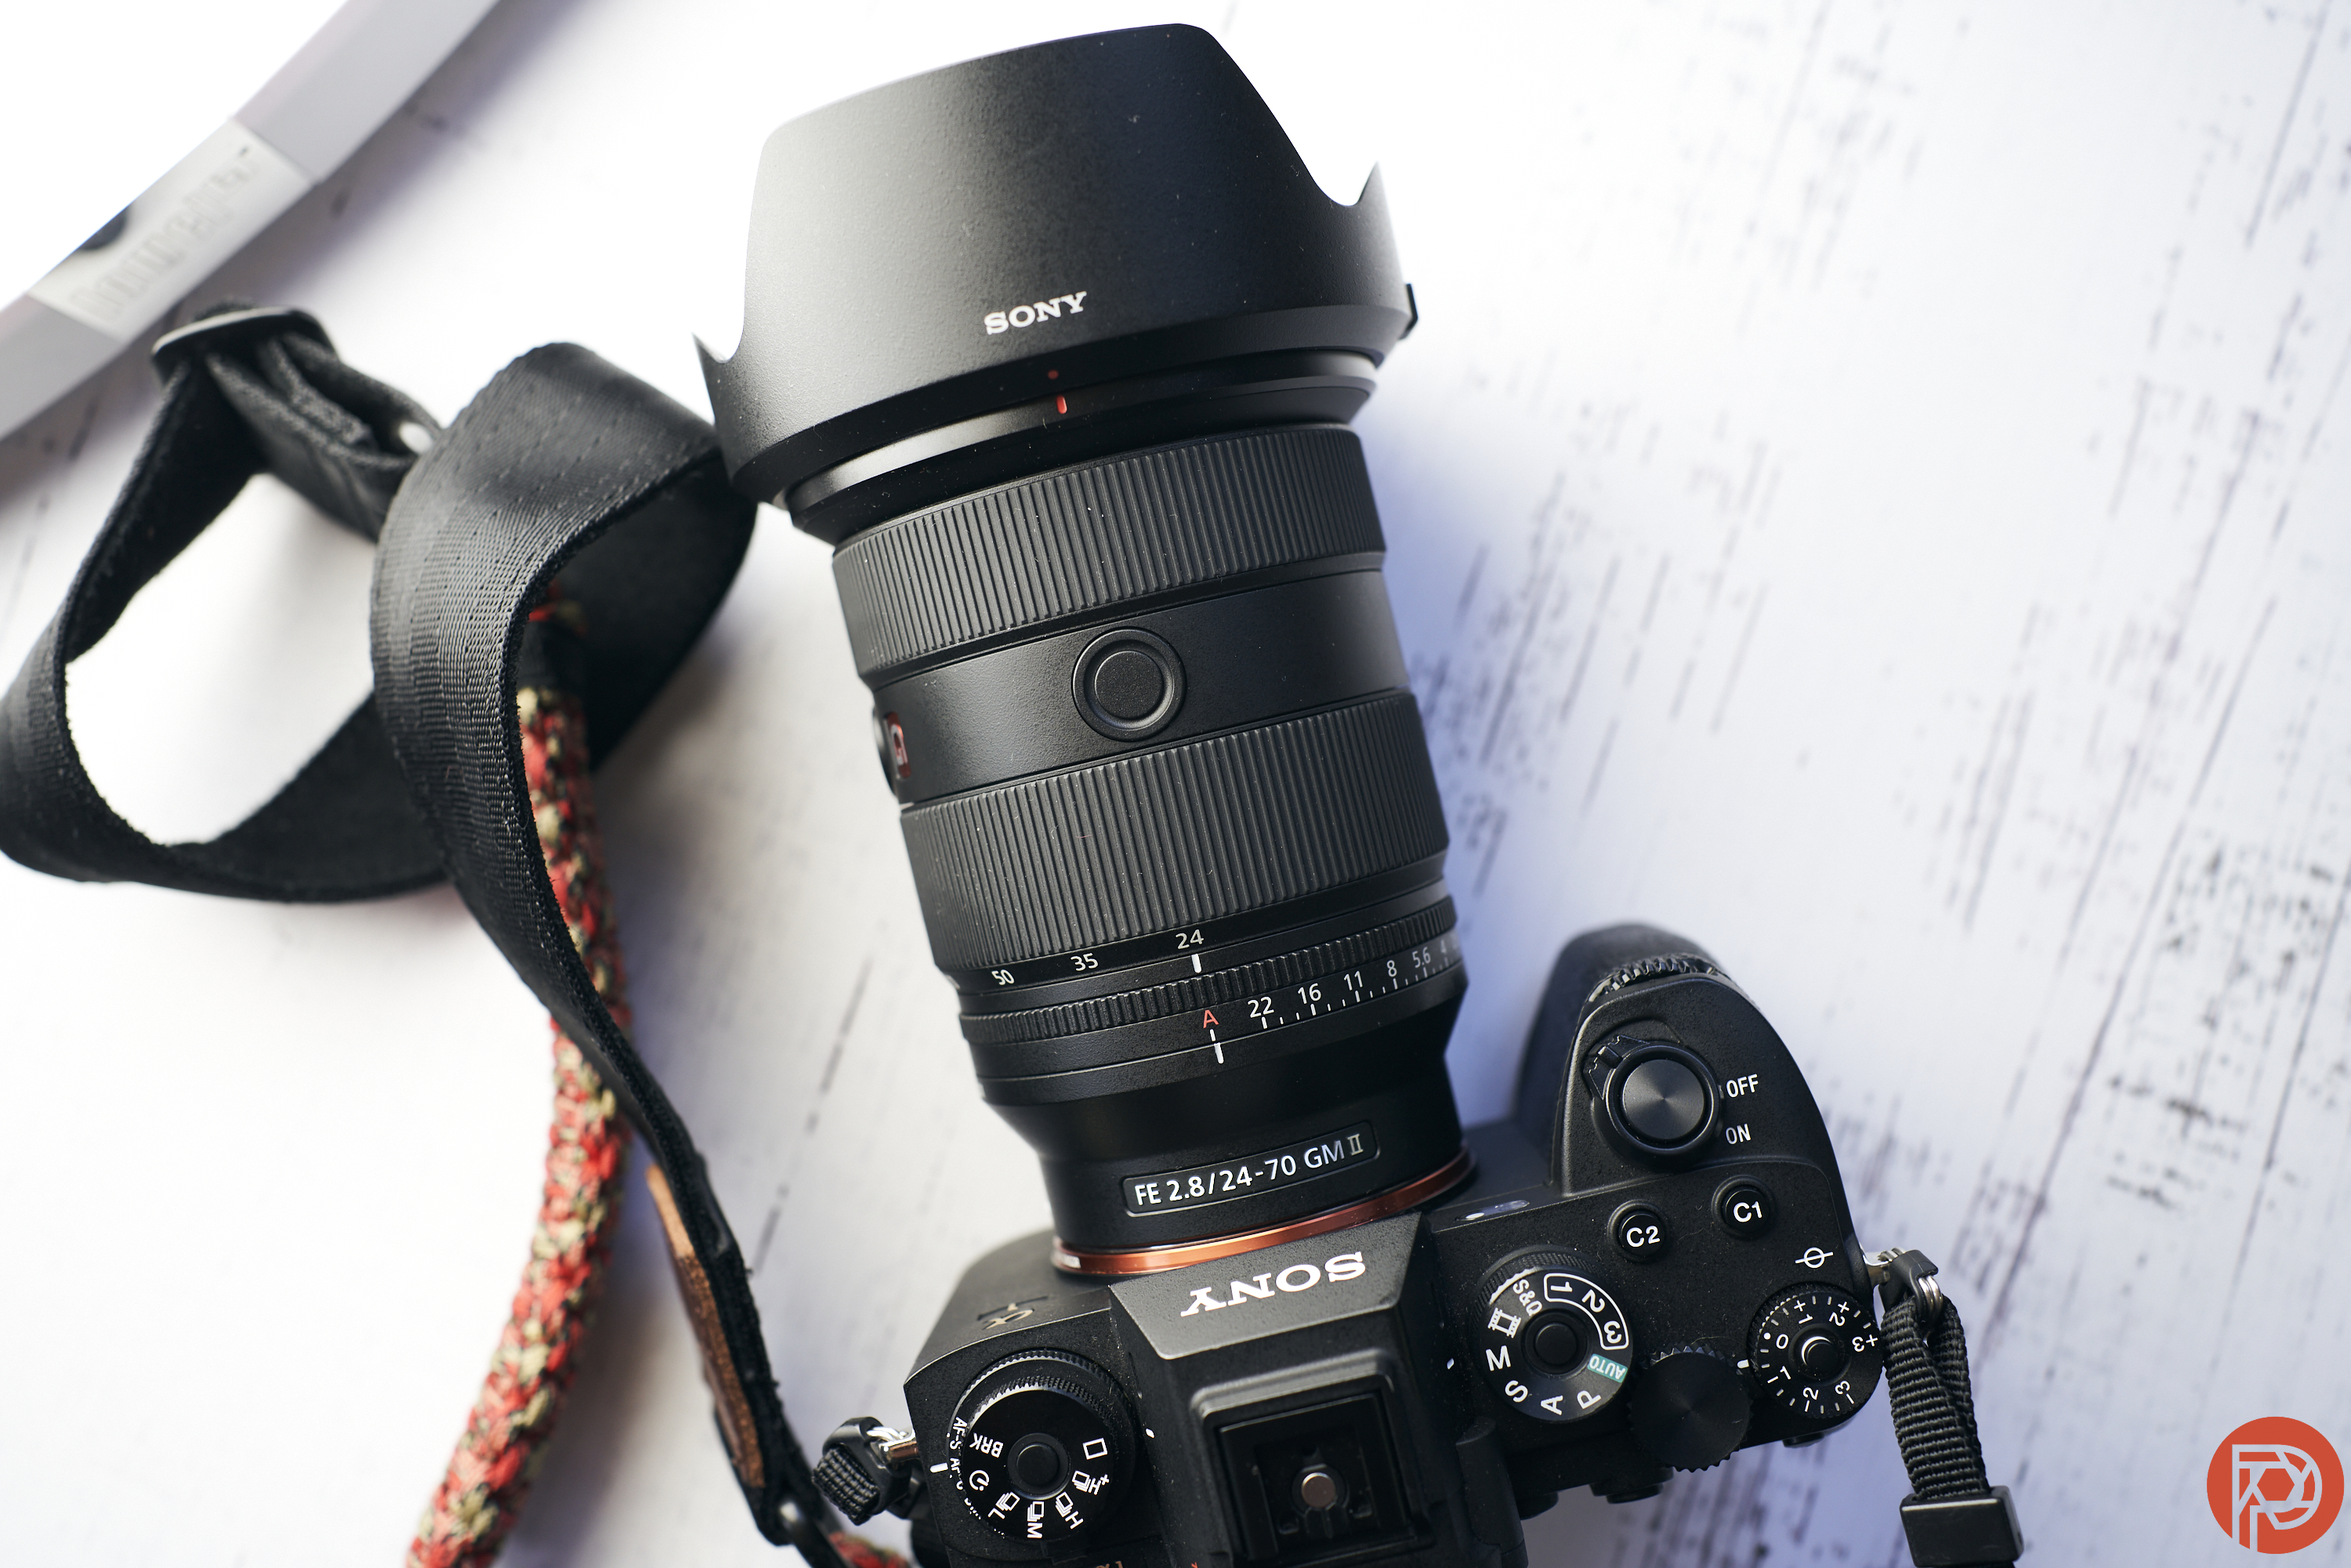 Chris Gampat The Phoblographer sony 24-70mm f2.8 G Master II review product images 41-80s400